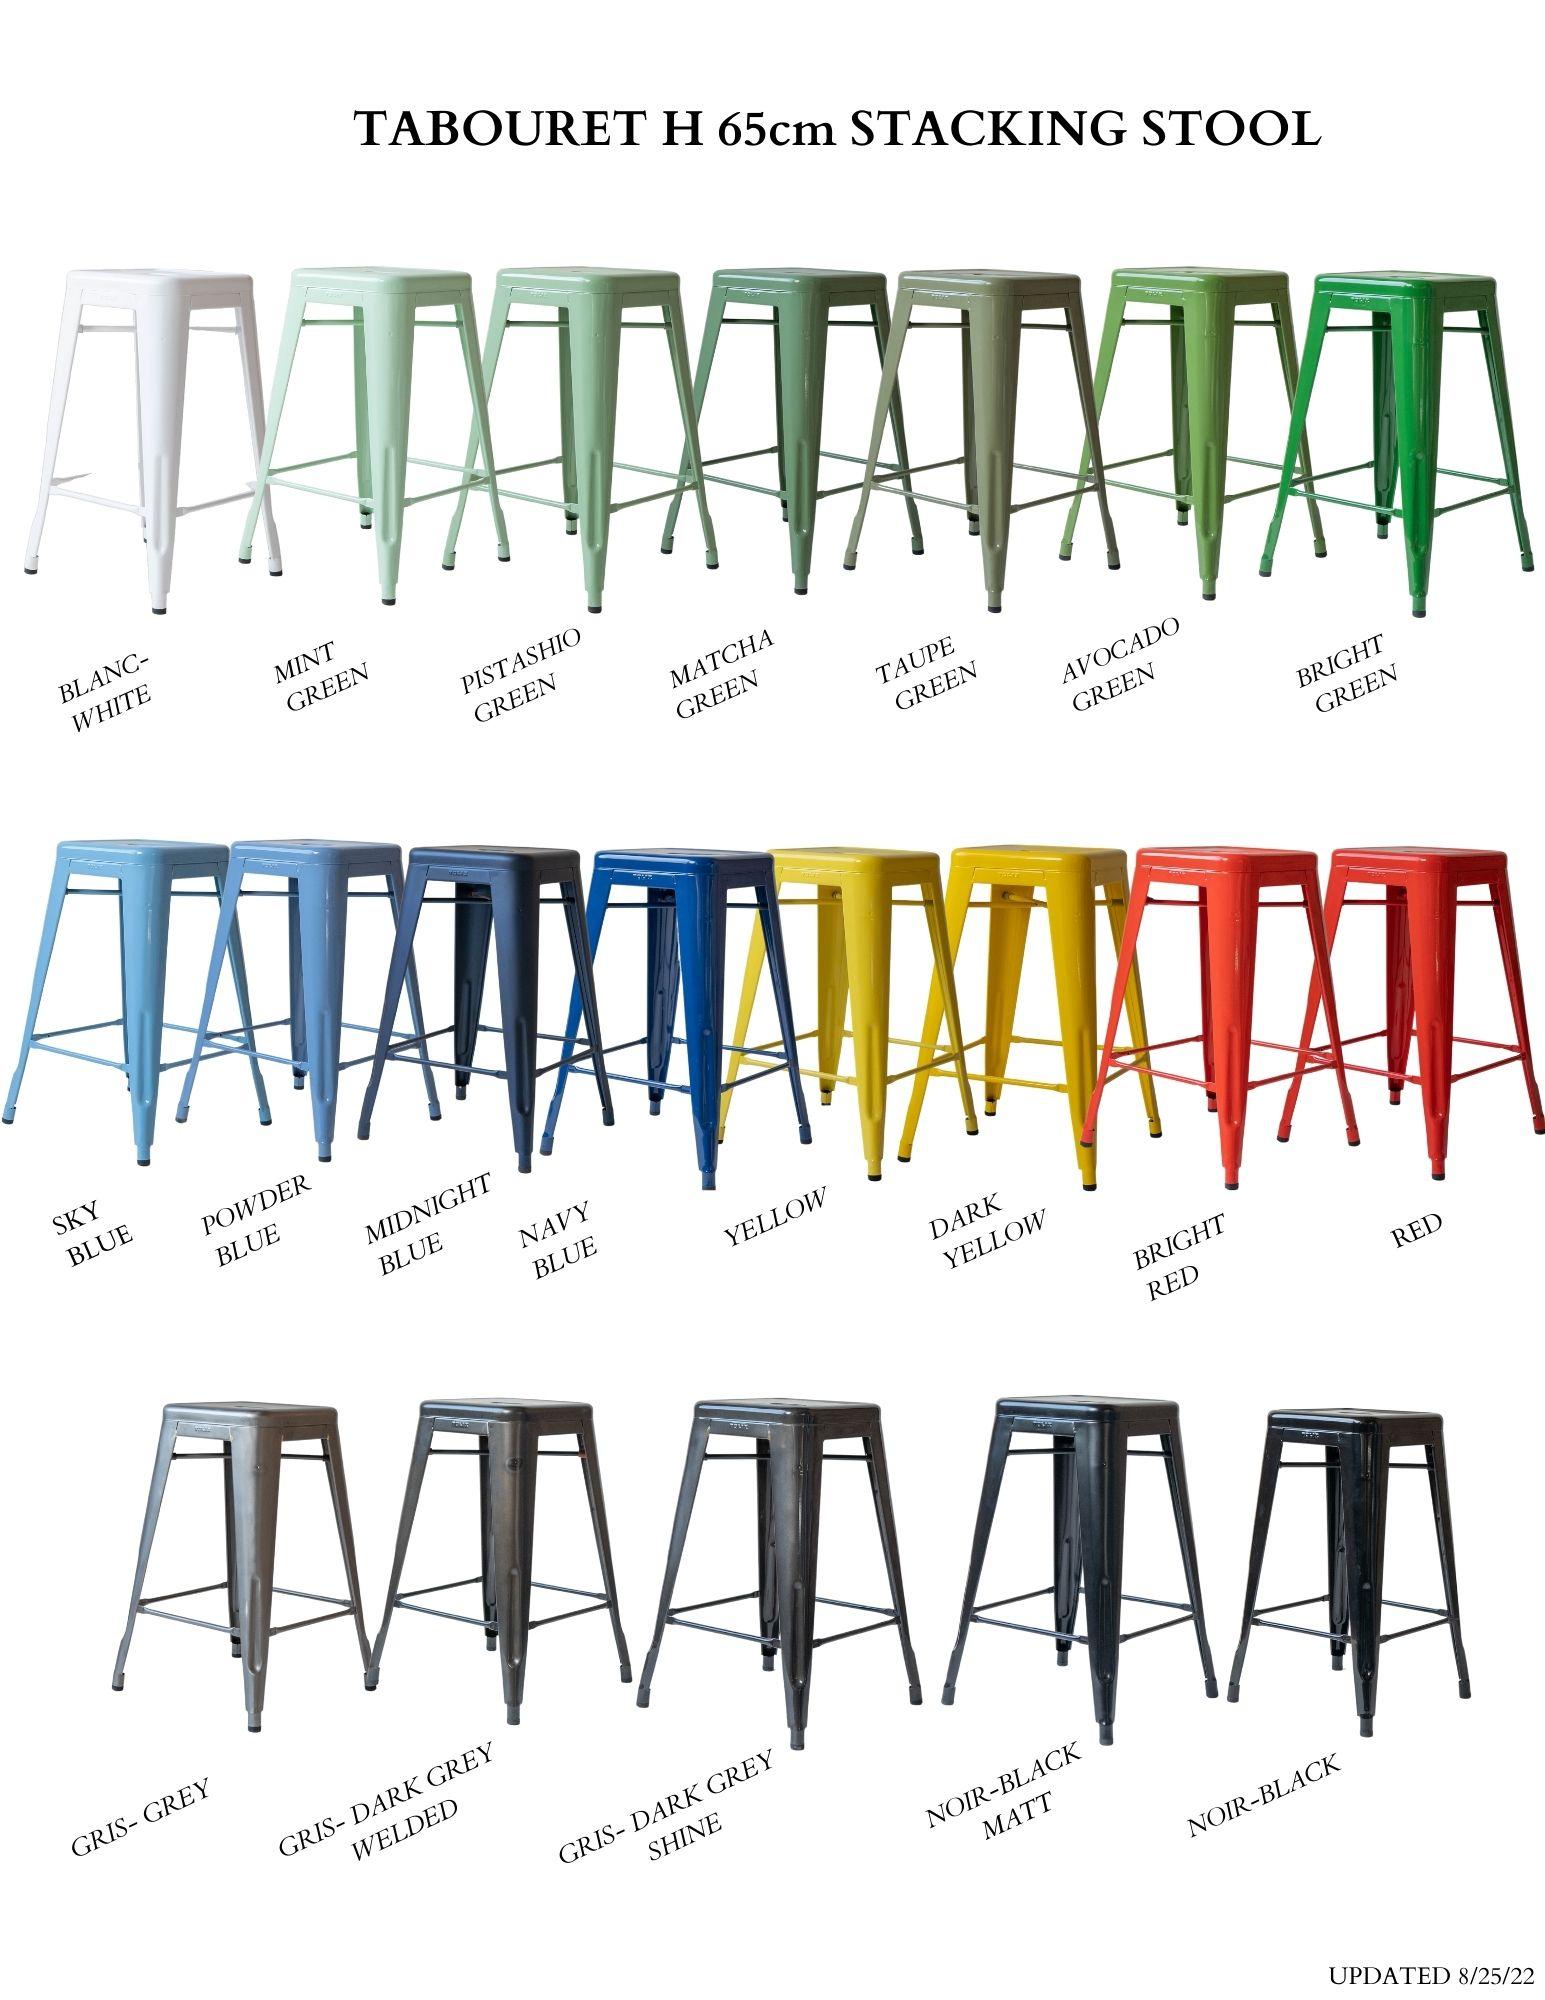 Genuine French Tolix Stacking Stools Set of (10) in Charcoal Grey 3